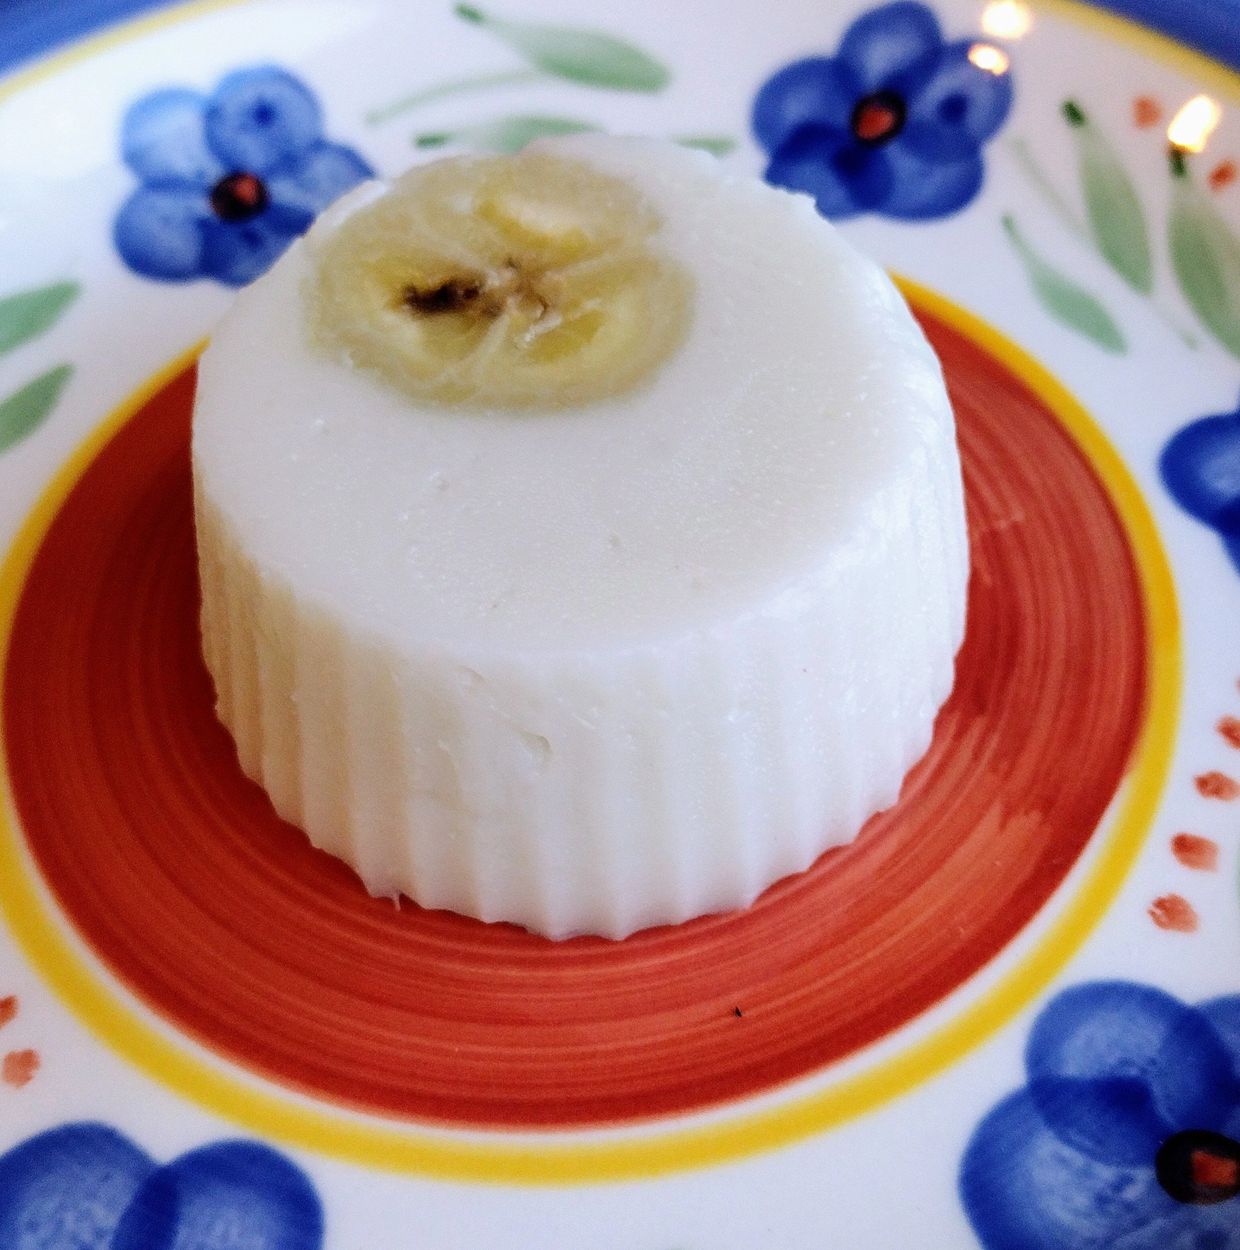 Coconut Cream Pudding with Banana
Sunny Side Up Please!...
